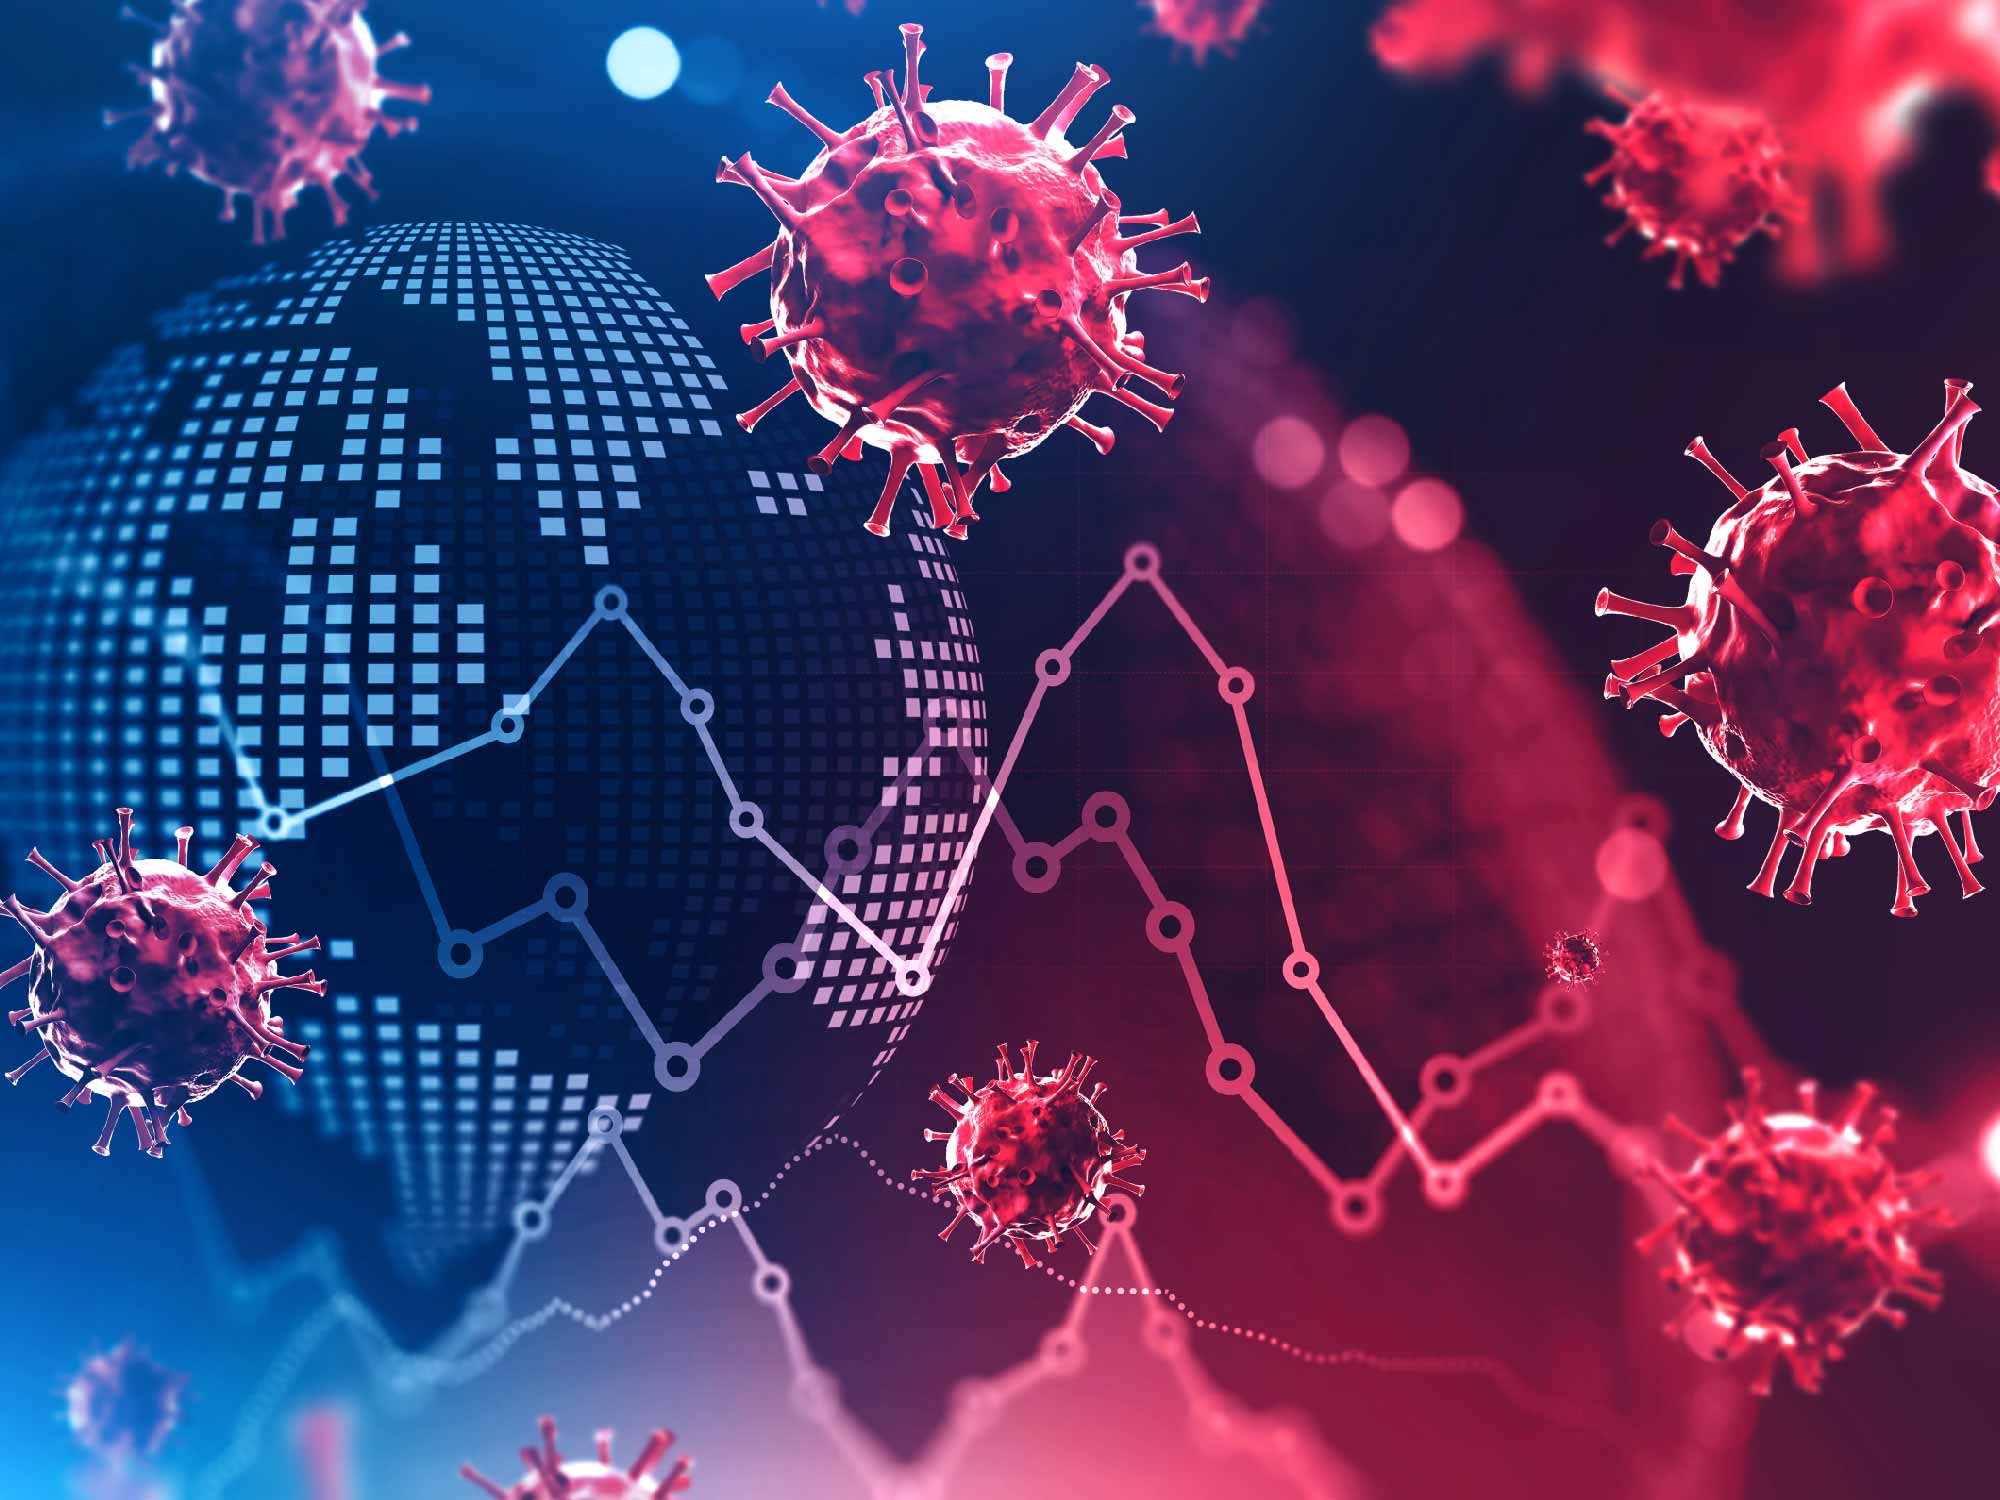 Our sister company TCC give us the low down on what Coronavirus means from a compliance perspective and what remediation risks it could exacerbate for retail banks